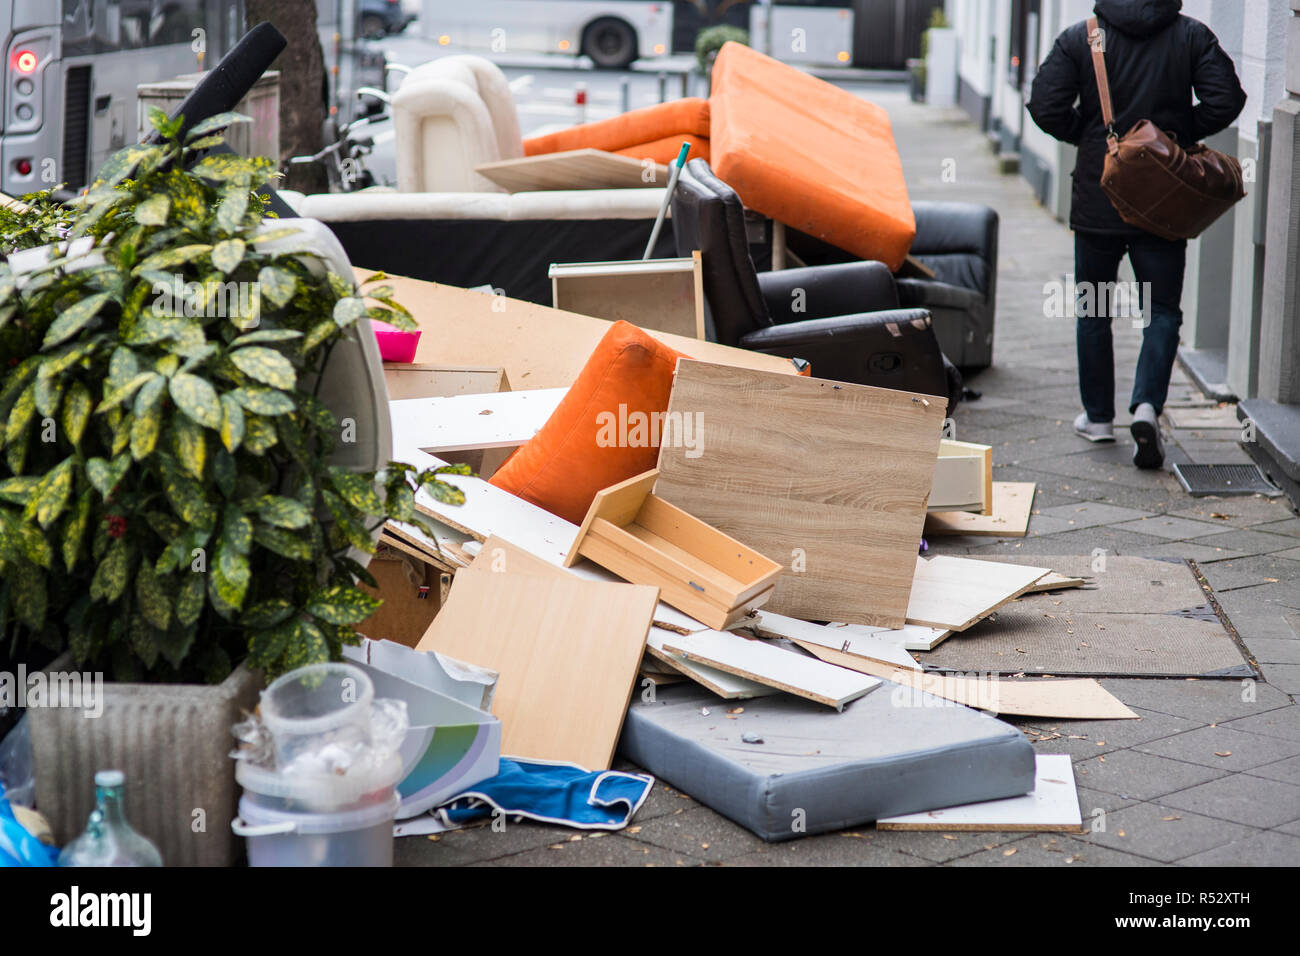 Recycling containers and waste in the german city of Düsseldorf Stock Photo